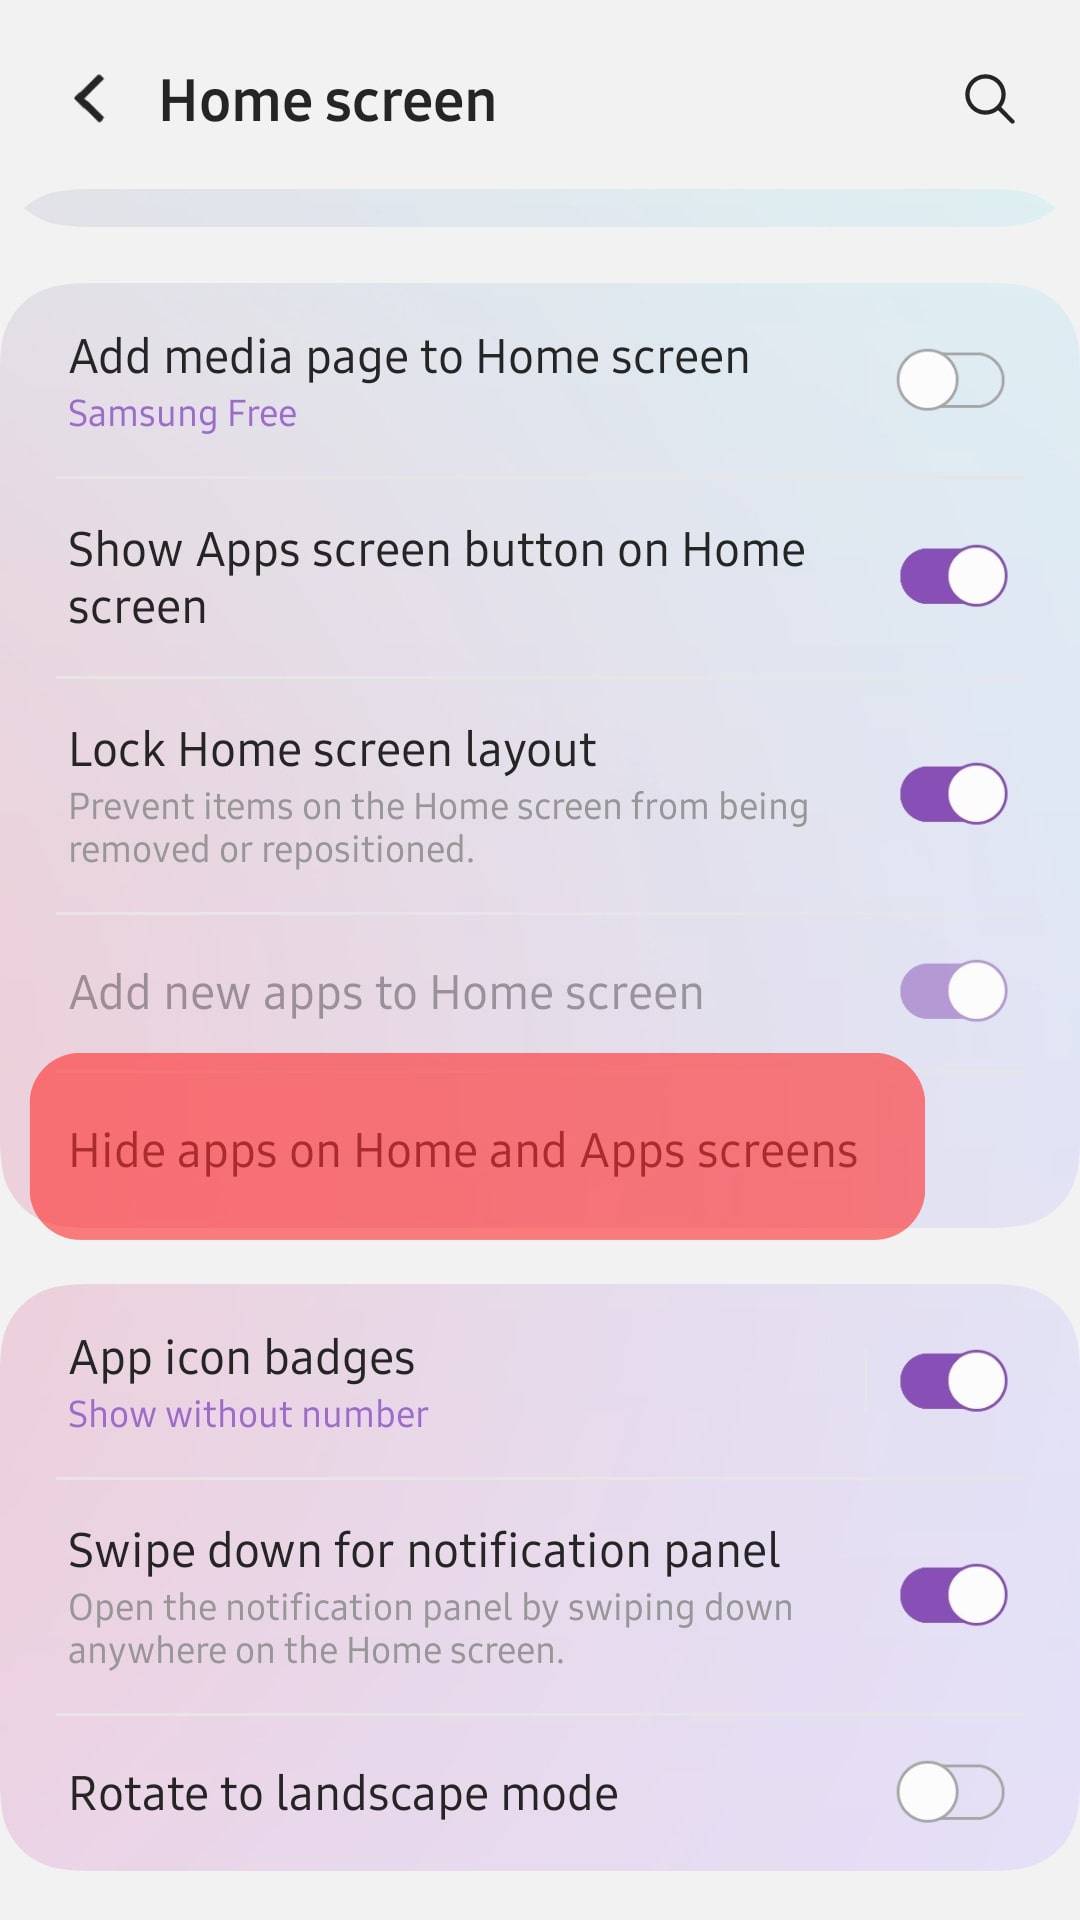 Tap On The Hide Apps On Home And Apps Screens Option.